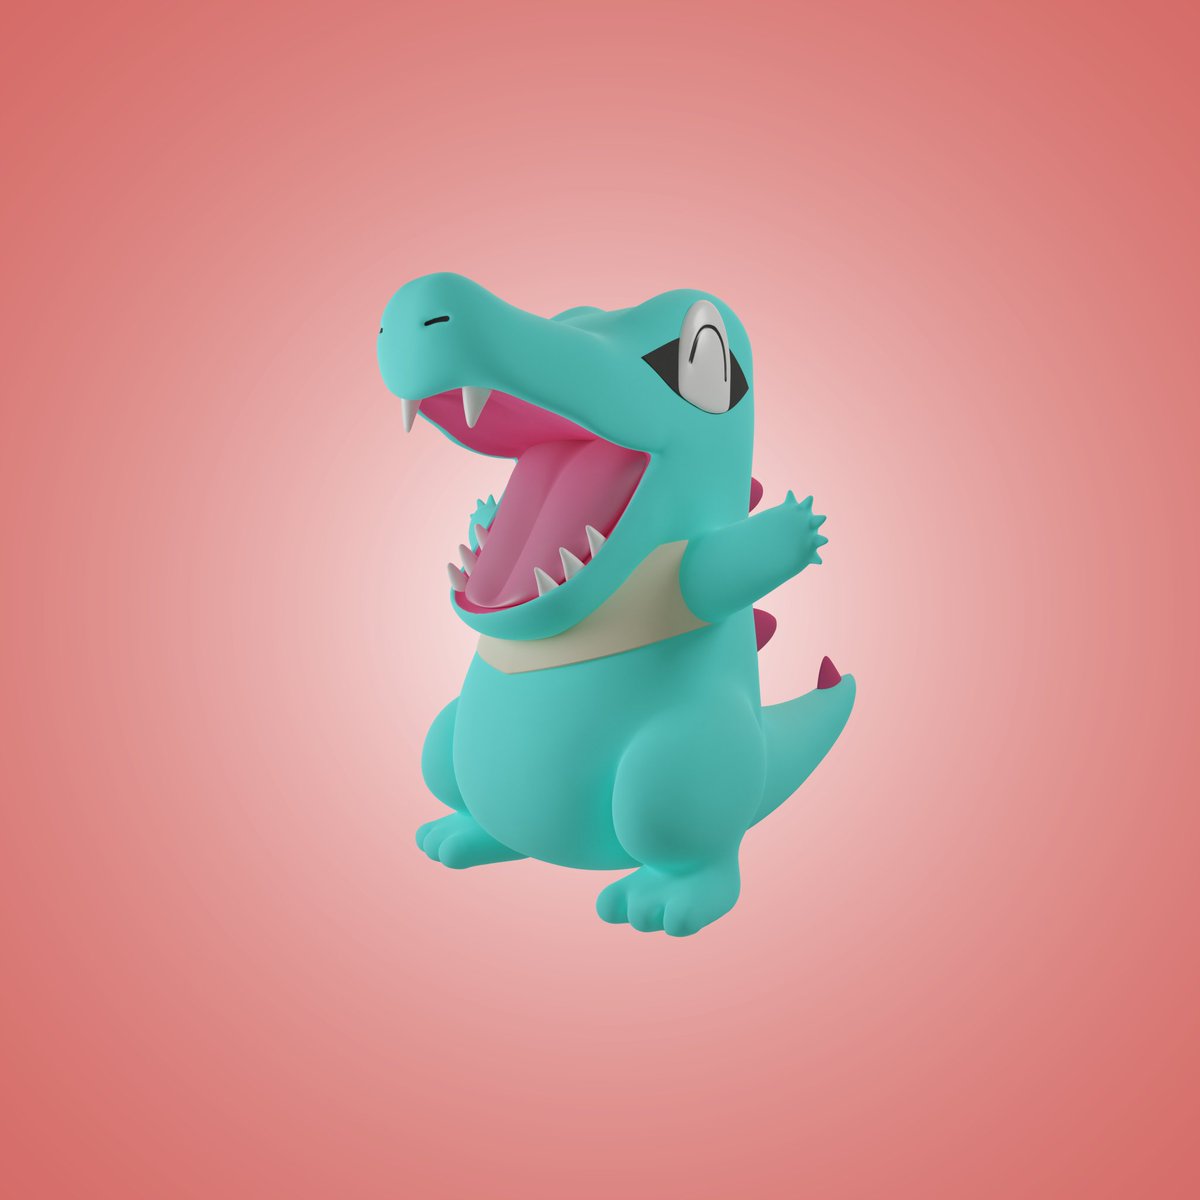 Finished Totodile for now.  Need to work on my rendering skills but happy enough with the results

#3dcharacterworkshop #3dcw #zbrush #pixologic #pixologiczbrush #pokemon #johto #johtostarters #totodile